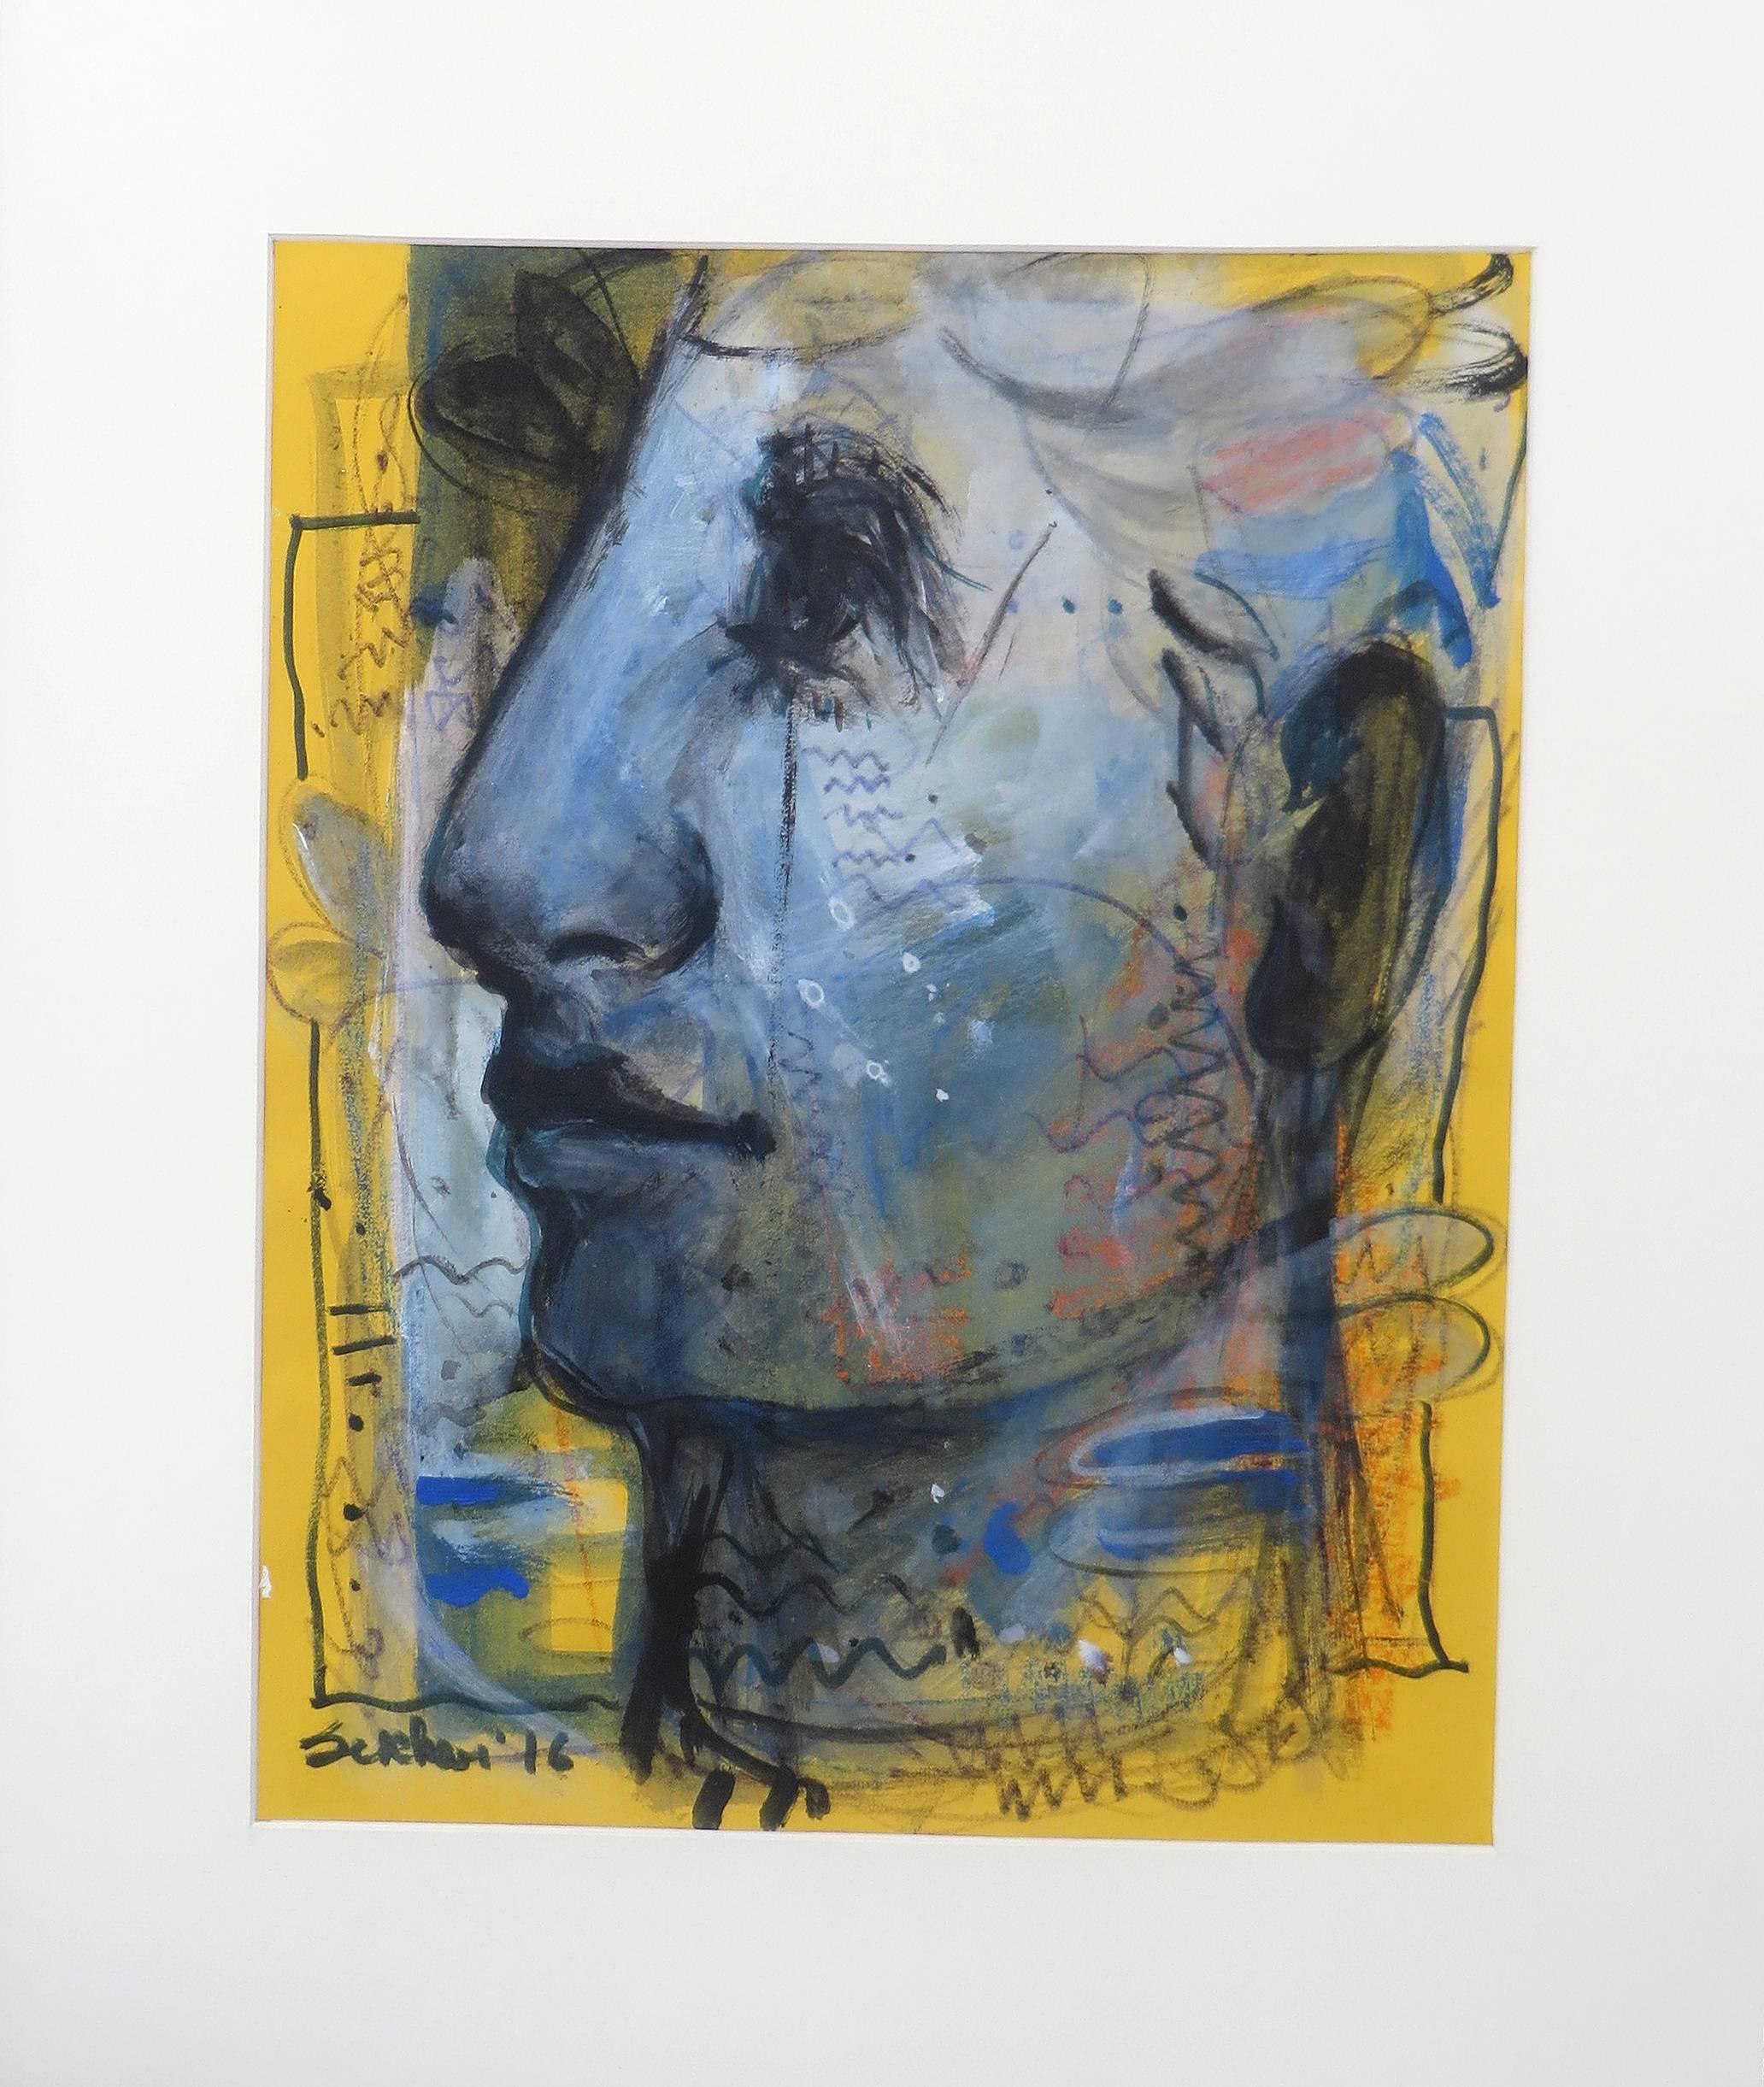 Sekhar Kar Figurative Painting - Faces, Moods, Expression, Mixed Media work by Contemporary Artist "In Stock"